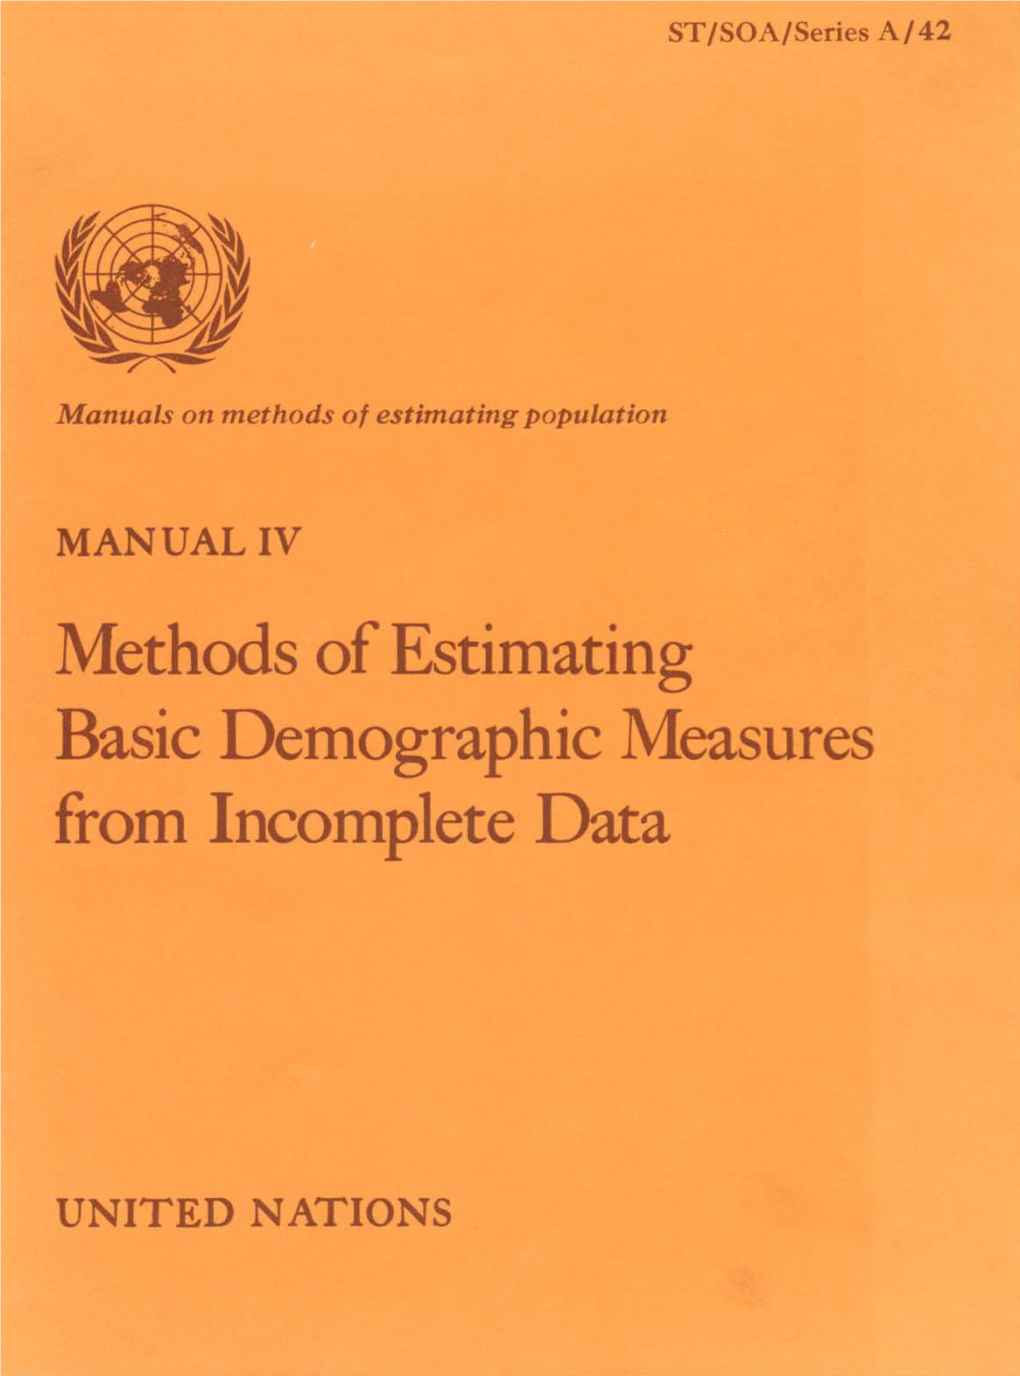 MANUAL IV Methods Ofestimating Basic Demographic Measures from Incomplete Data